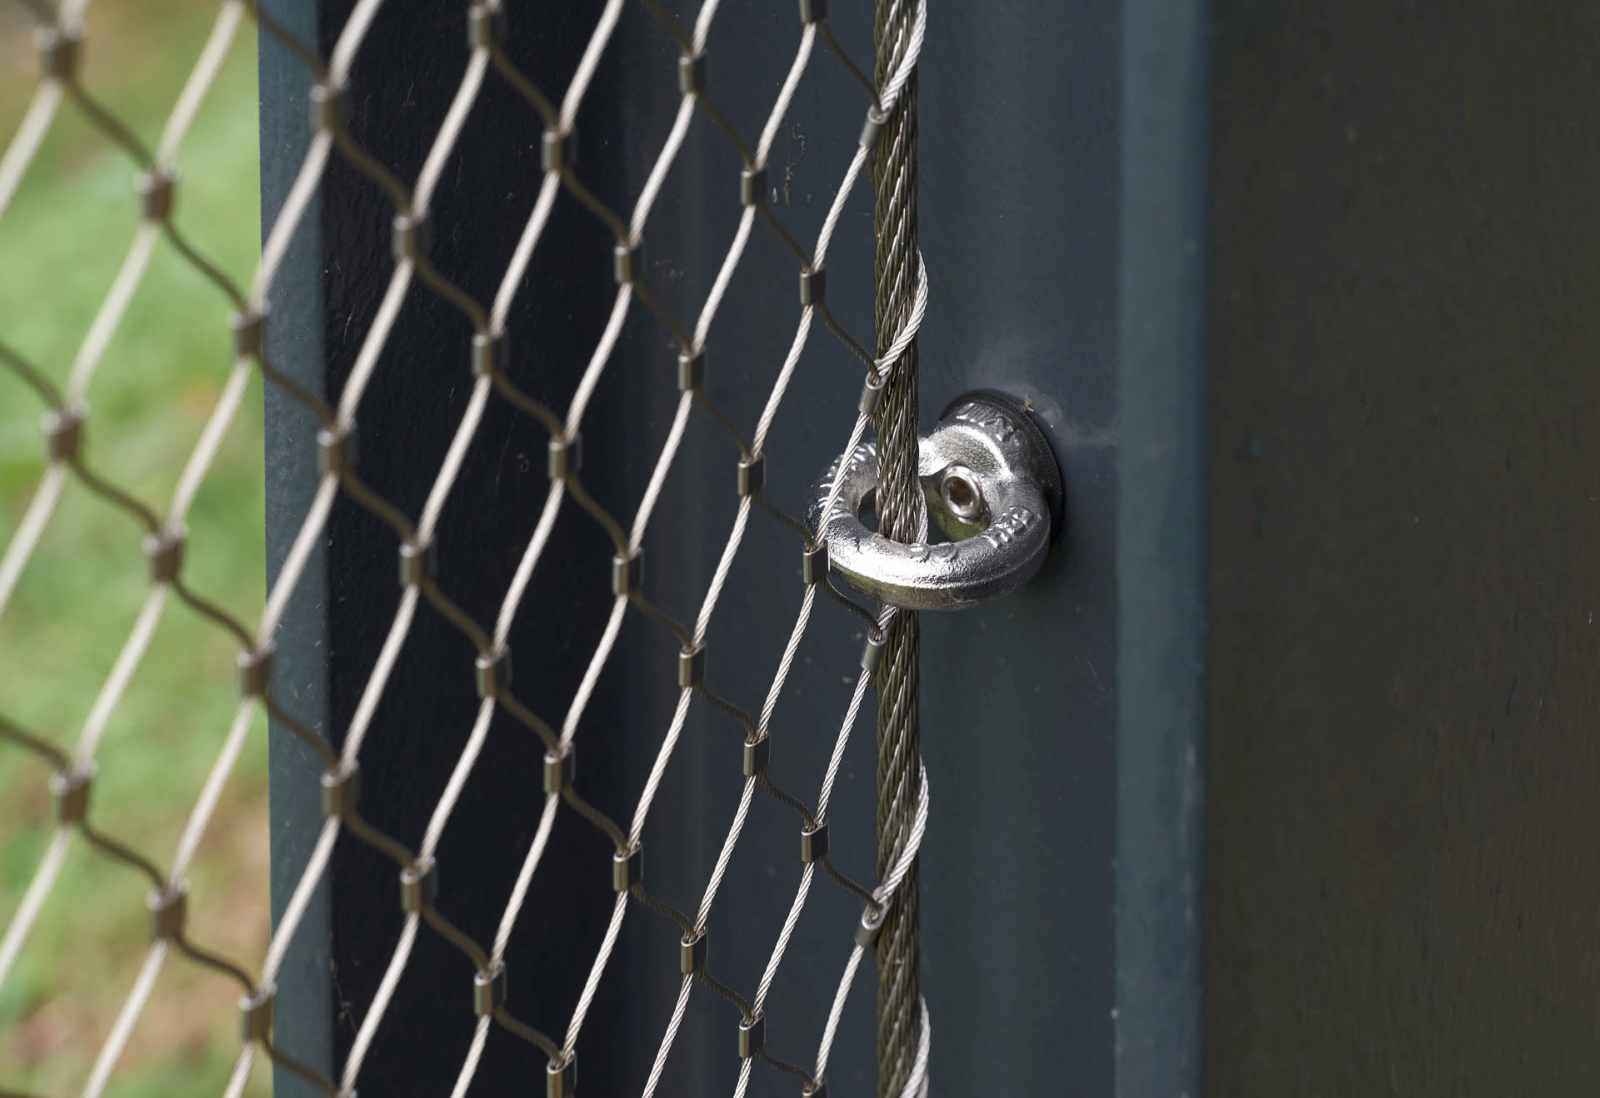 A steel ring on a post holding stainless steel mesh